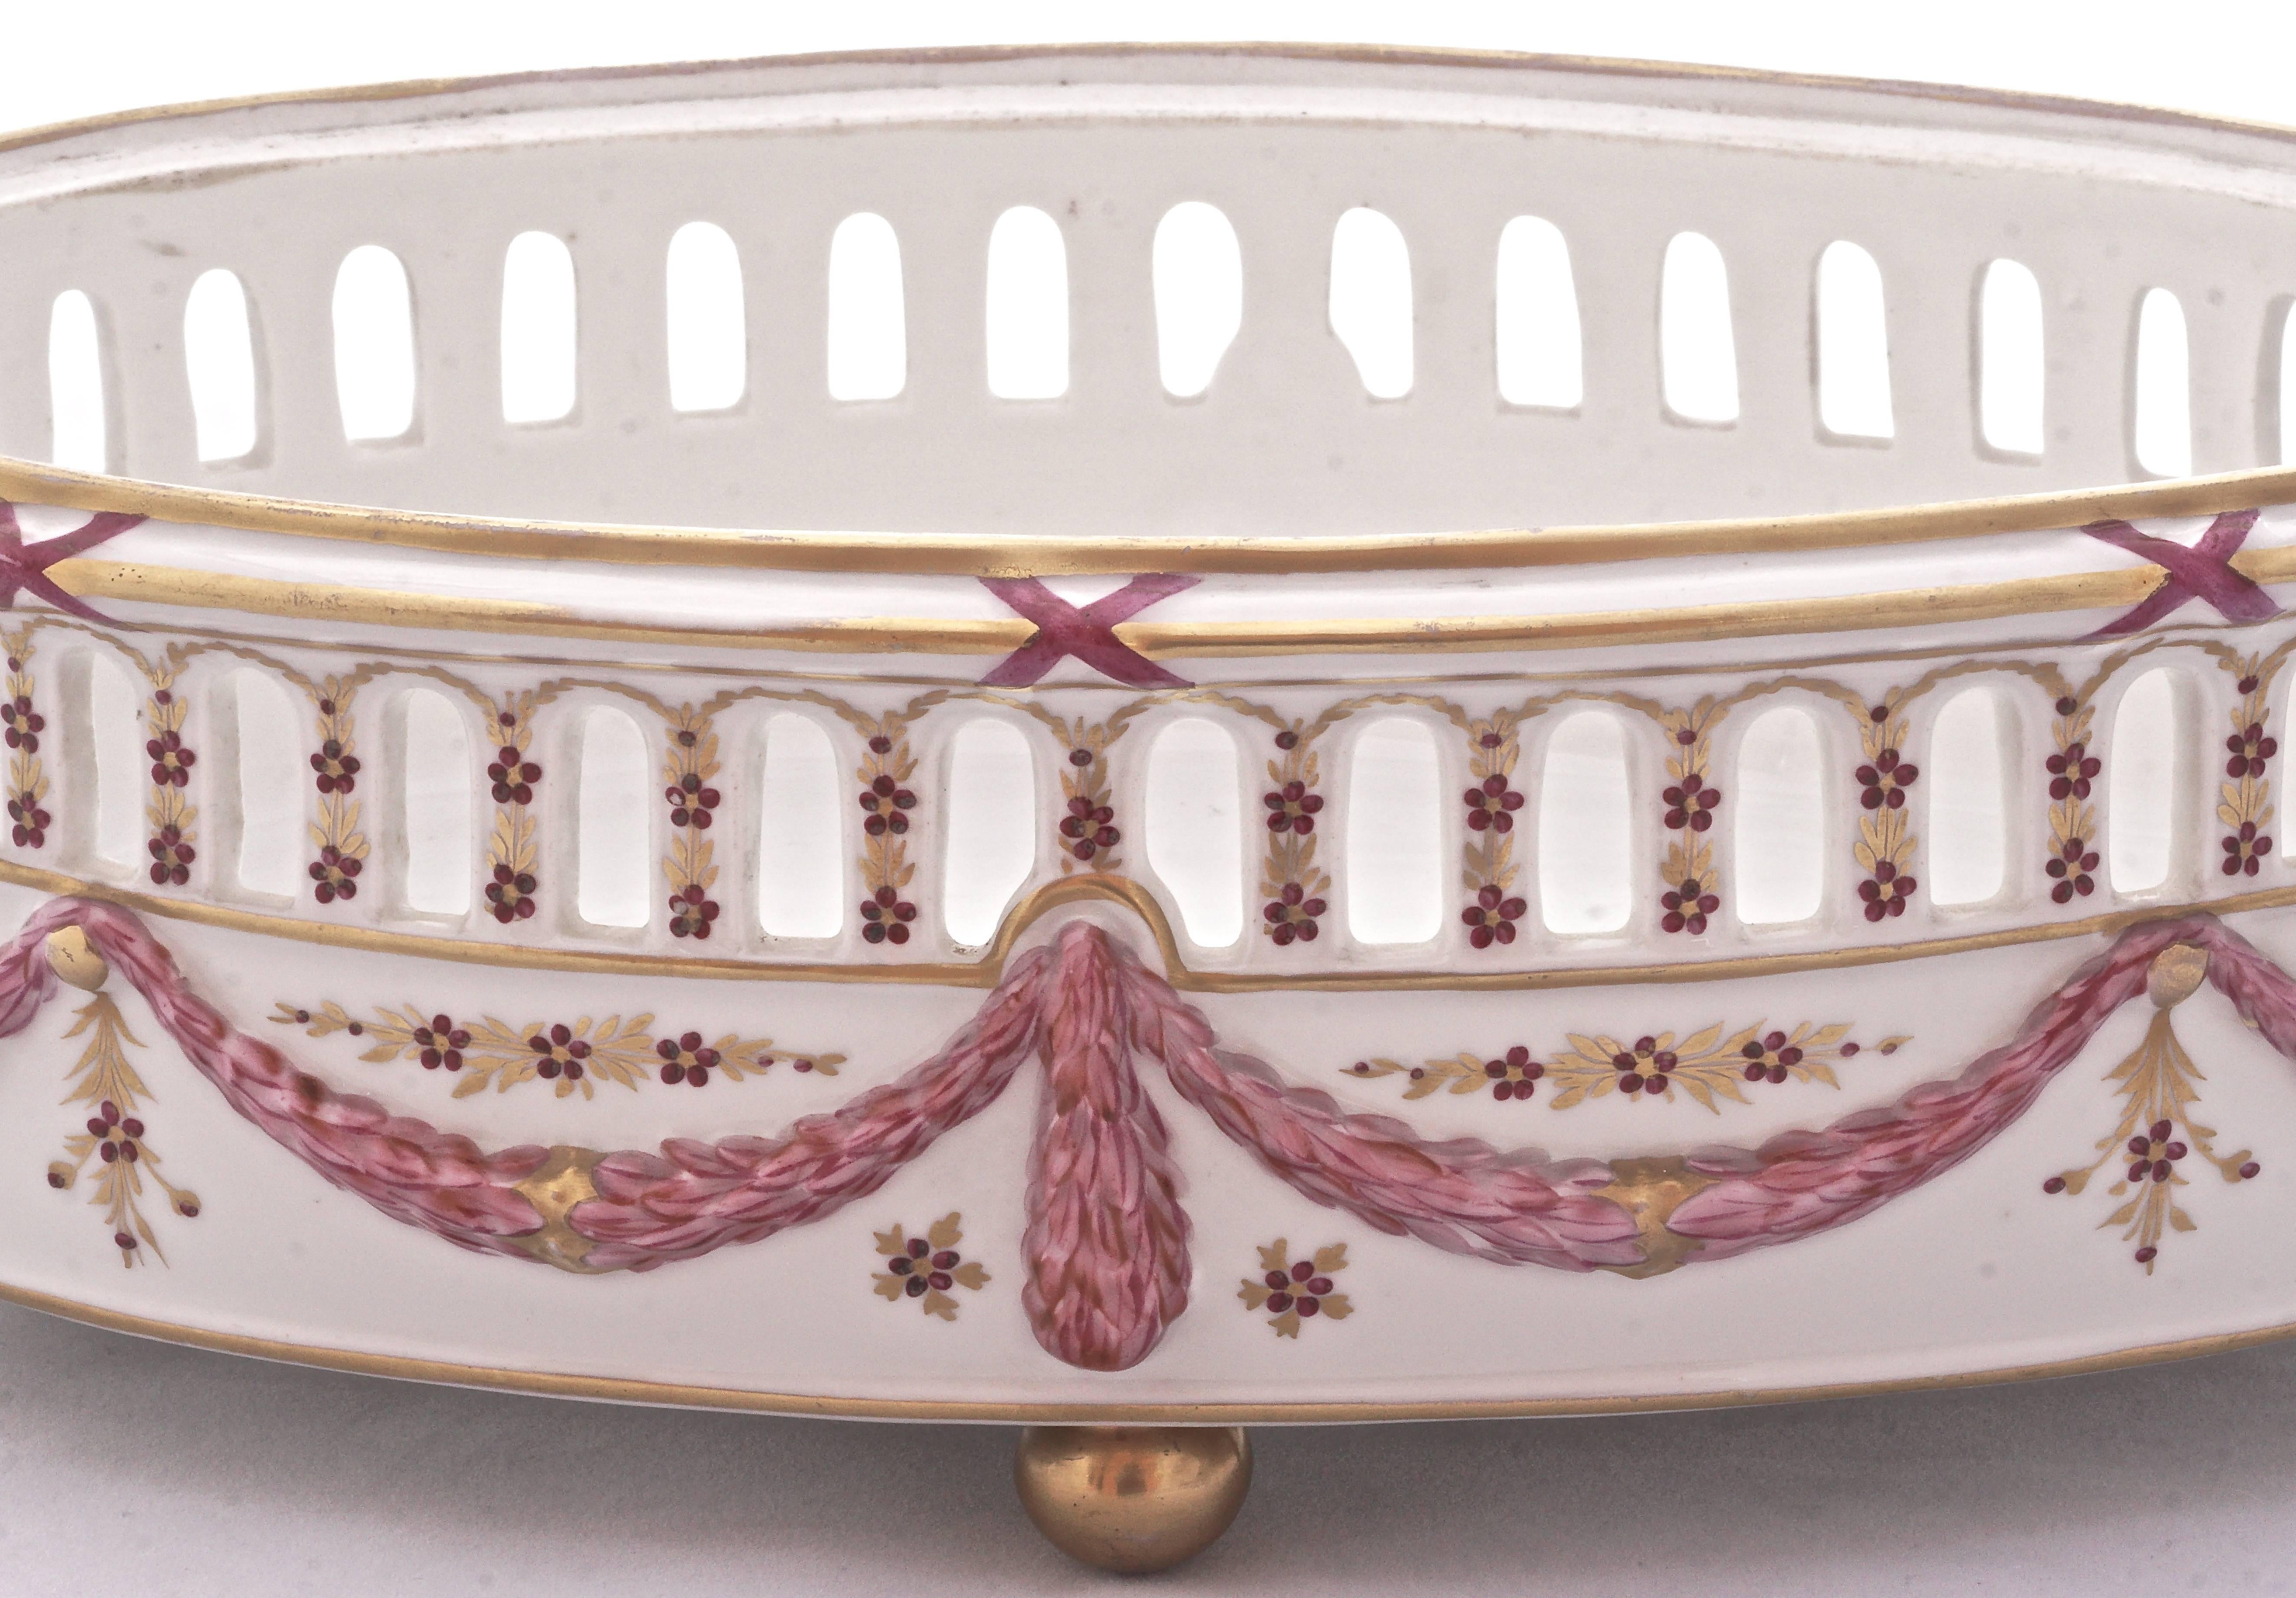 Beautiful oval vintage French porcelain basket standing on four golden ball feet. Featuring a floral hand painted design by Delvaux in shades of pink with gold highlights. Measuring 31cm, 12.2 inches, by 20.9cm, 8.2 inches, by 10cm, 3.9 inches. It